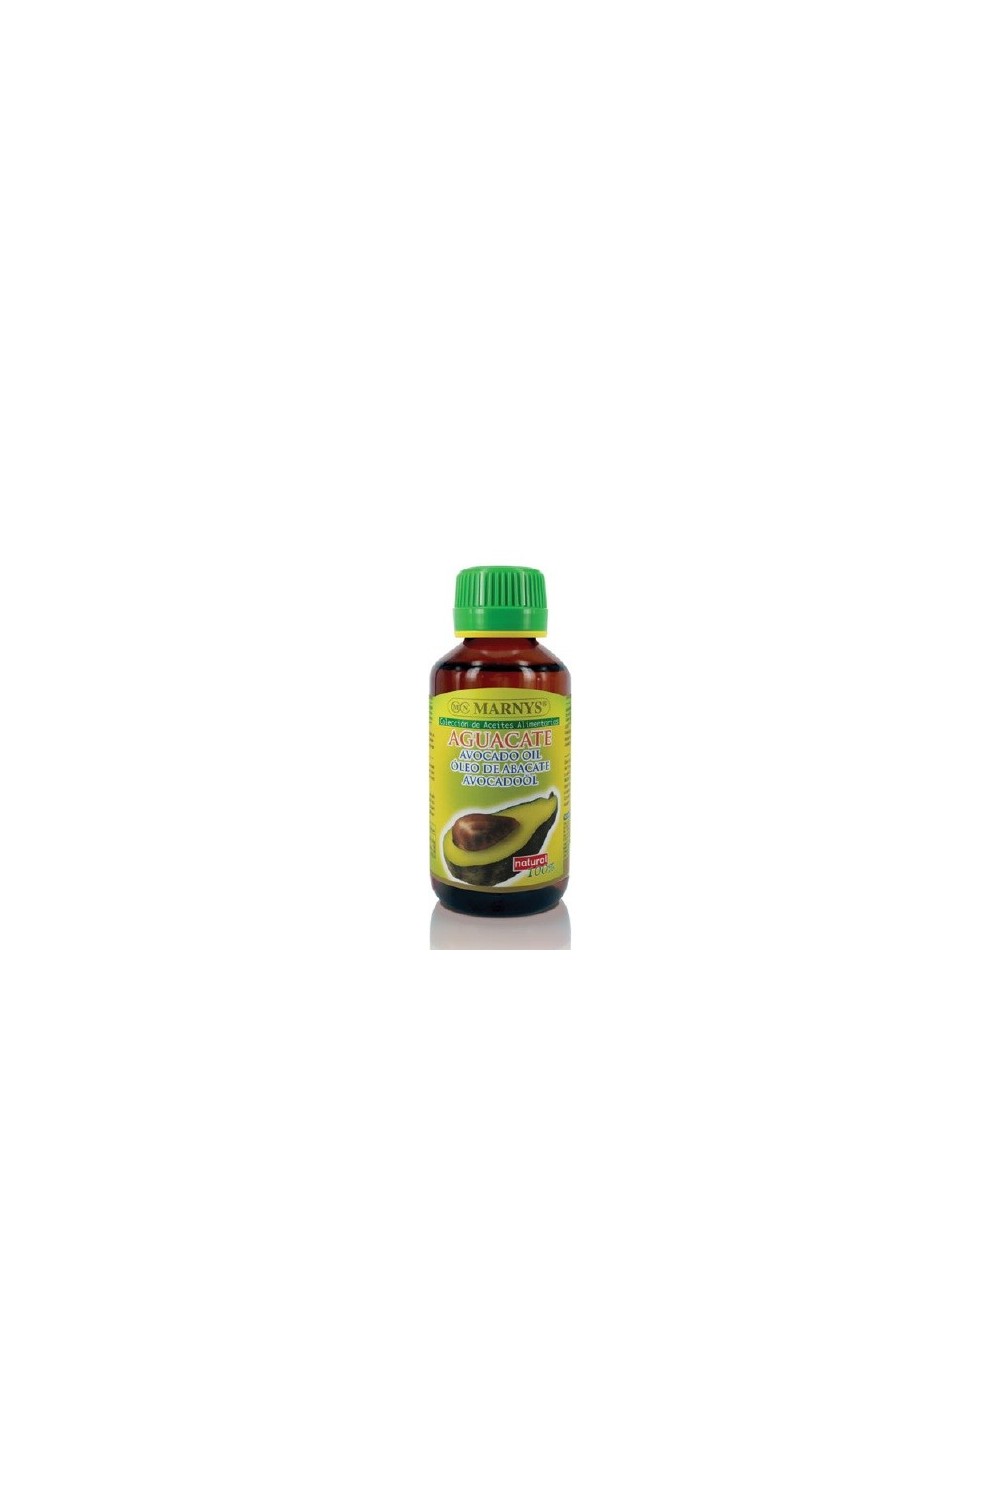 Marnys Aceite Aguacate 125ml